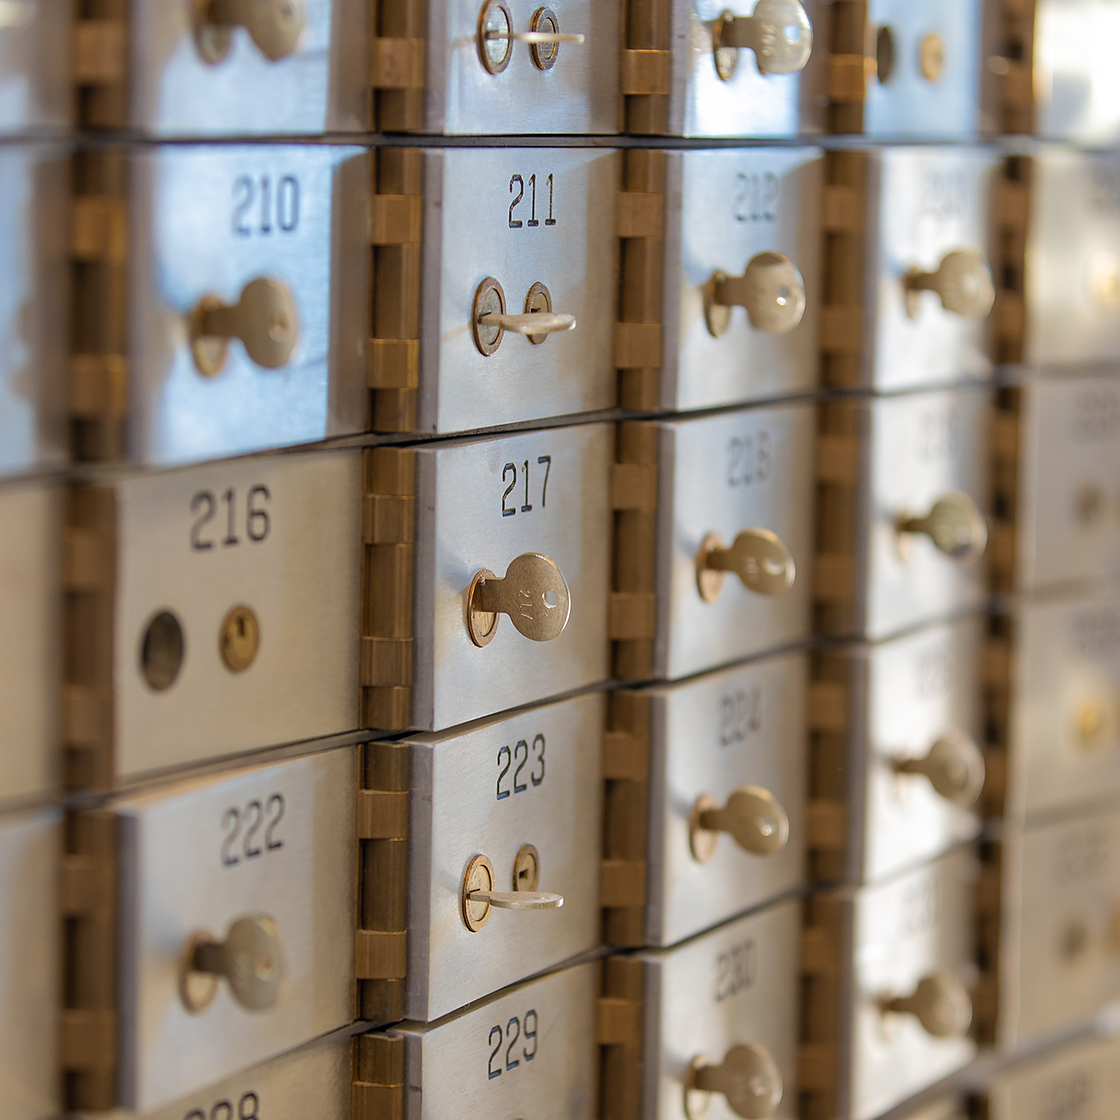 Are Safe Deposit Boxes on Their Way Out?